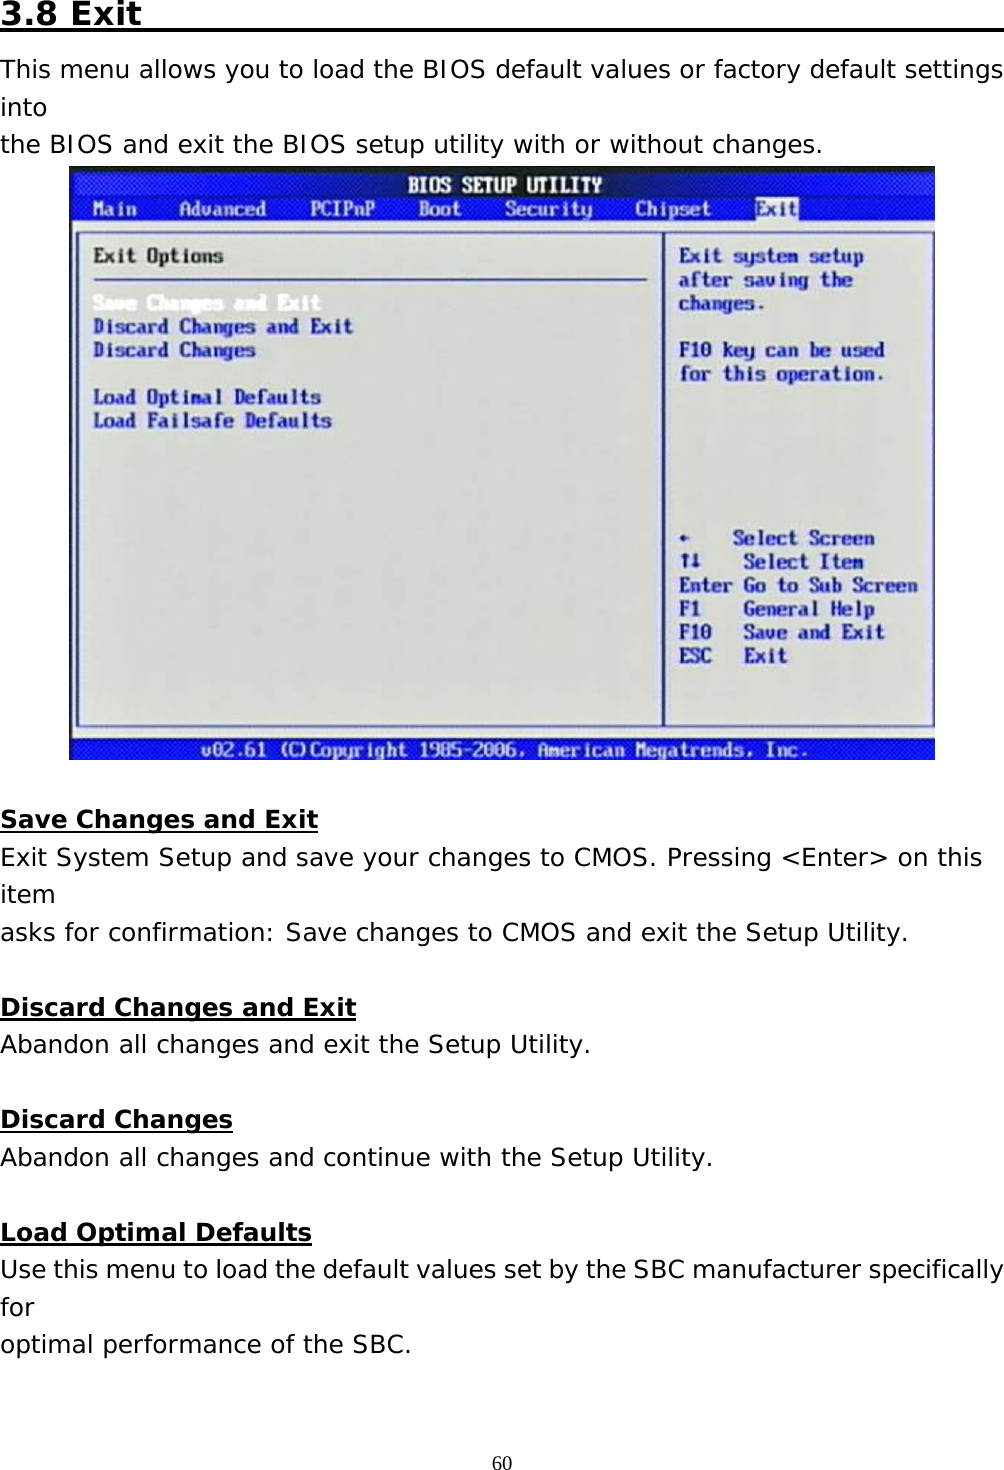  60 3.8 Exit                                                     This menu allows you to load the BIOS default values or factory default settings into the BIOS and exit the BIOS setup utility with or without changes.   Save Changes and Exit Exit System Setup and save your changes to CMOS. Pressing &lt;Enter&gt; on this item asks for confirmation: Save changes to CMOS and exit the Setup Utility.  Discard Changes and Exit Abandon all changes and exit the Setup Utility.  Discard Changes Abandon all changes and continue with the Setup Utility.  Load Optimal Defaults Use this menu to load the default values set by the SBC manufacturer specifically for optimal performance of the SBC.  